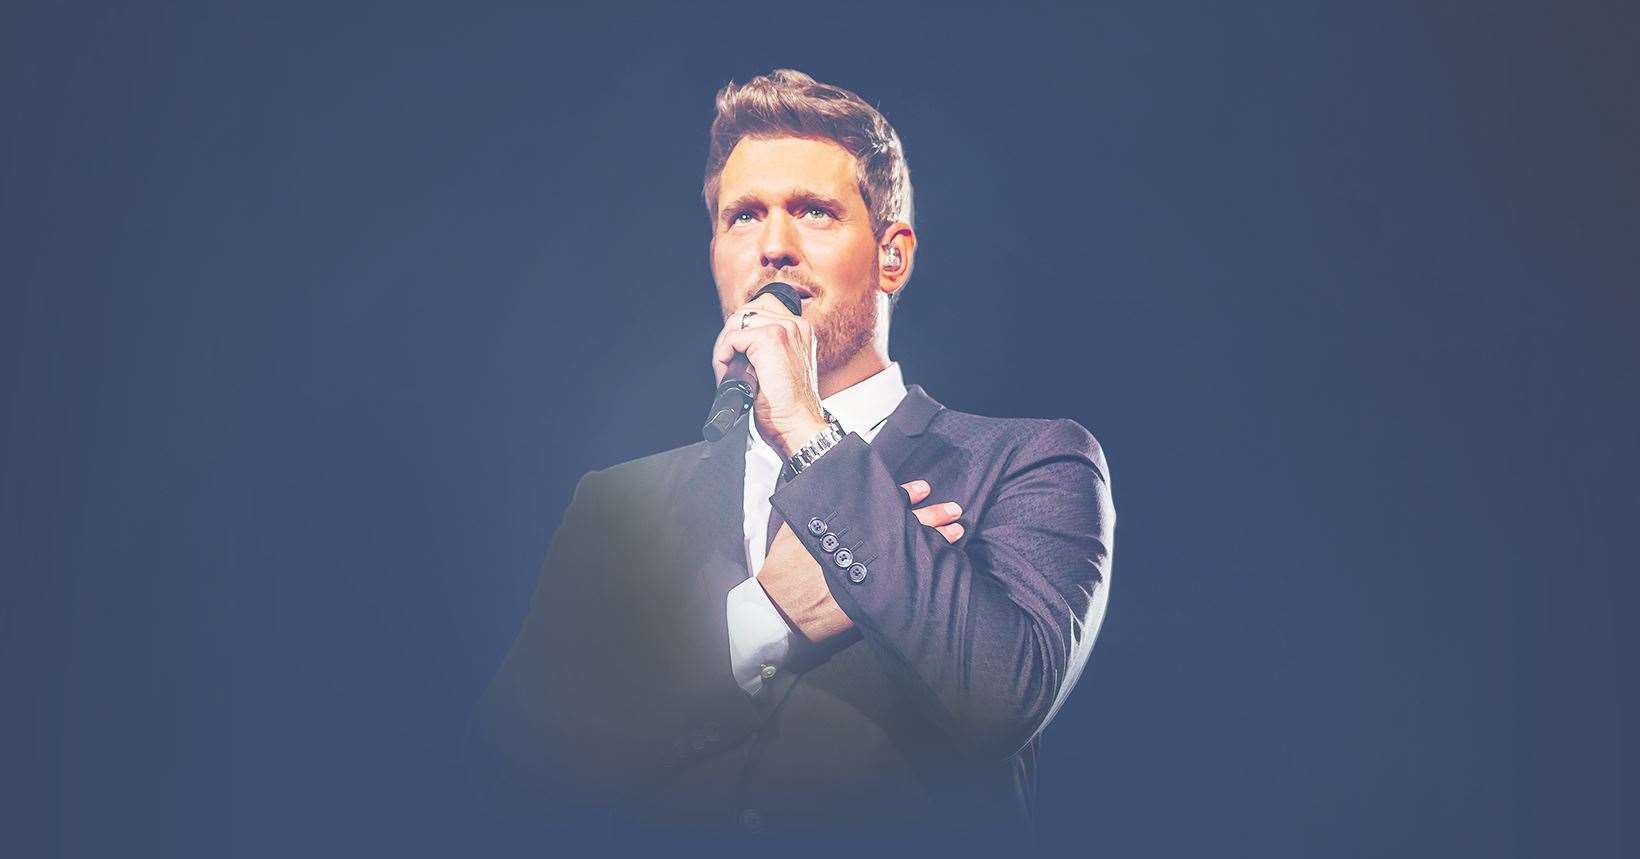 Superstar Michael Buble is due to play Canterbury in July